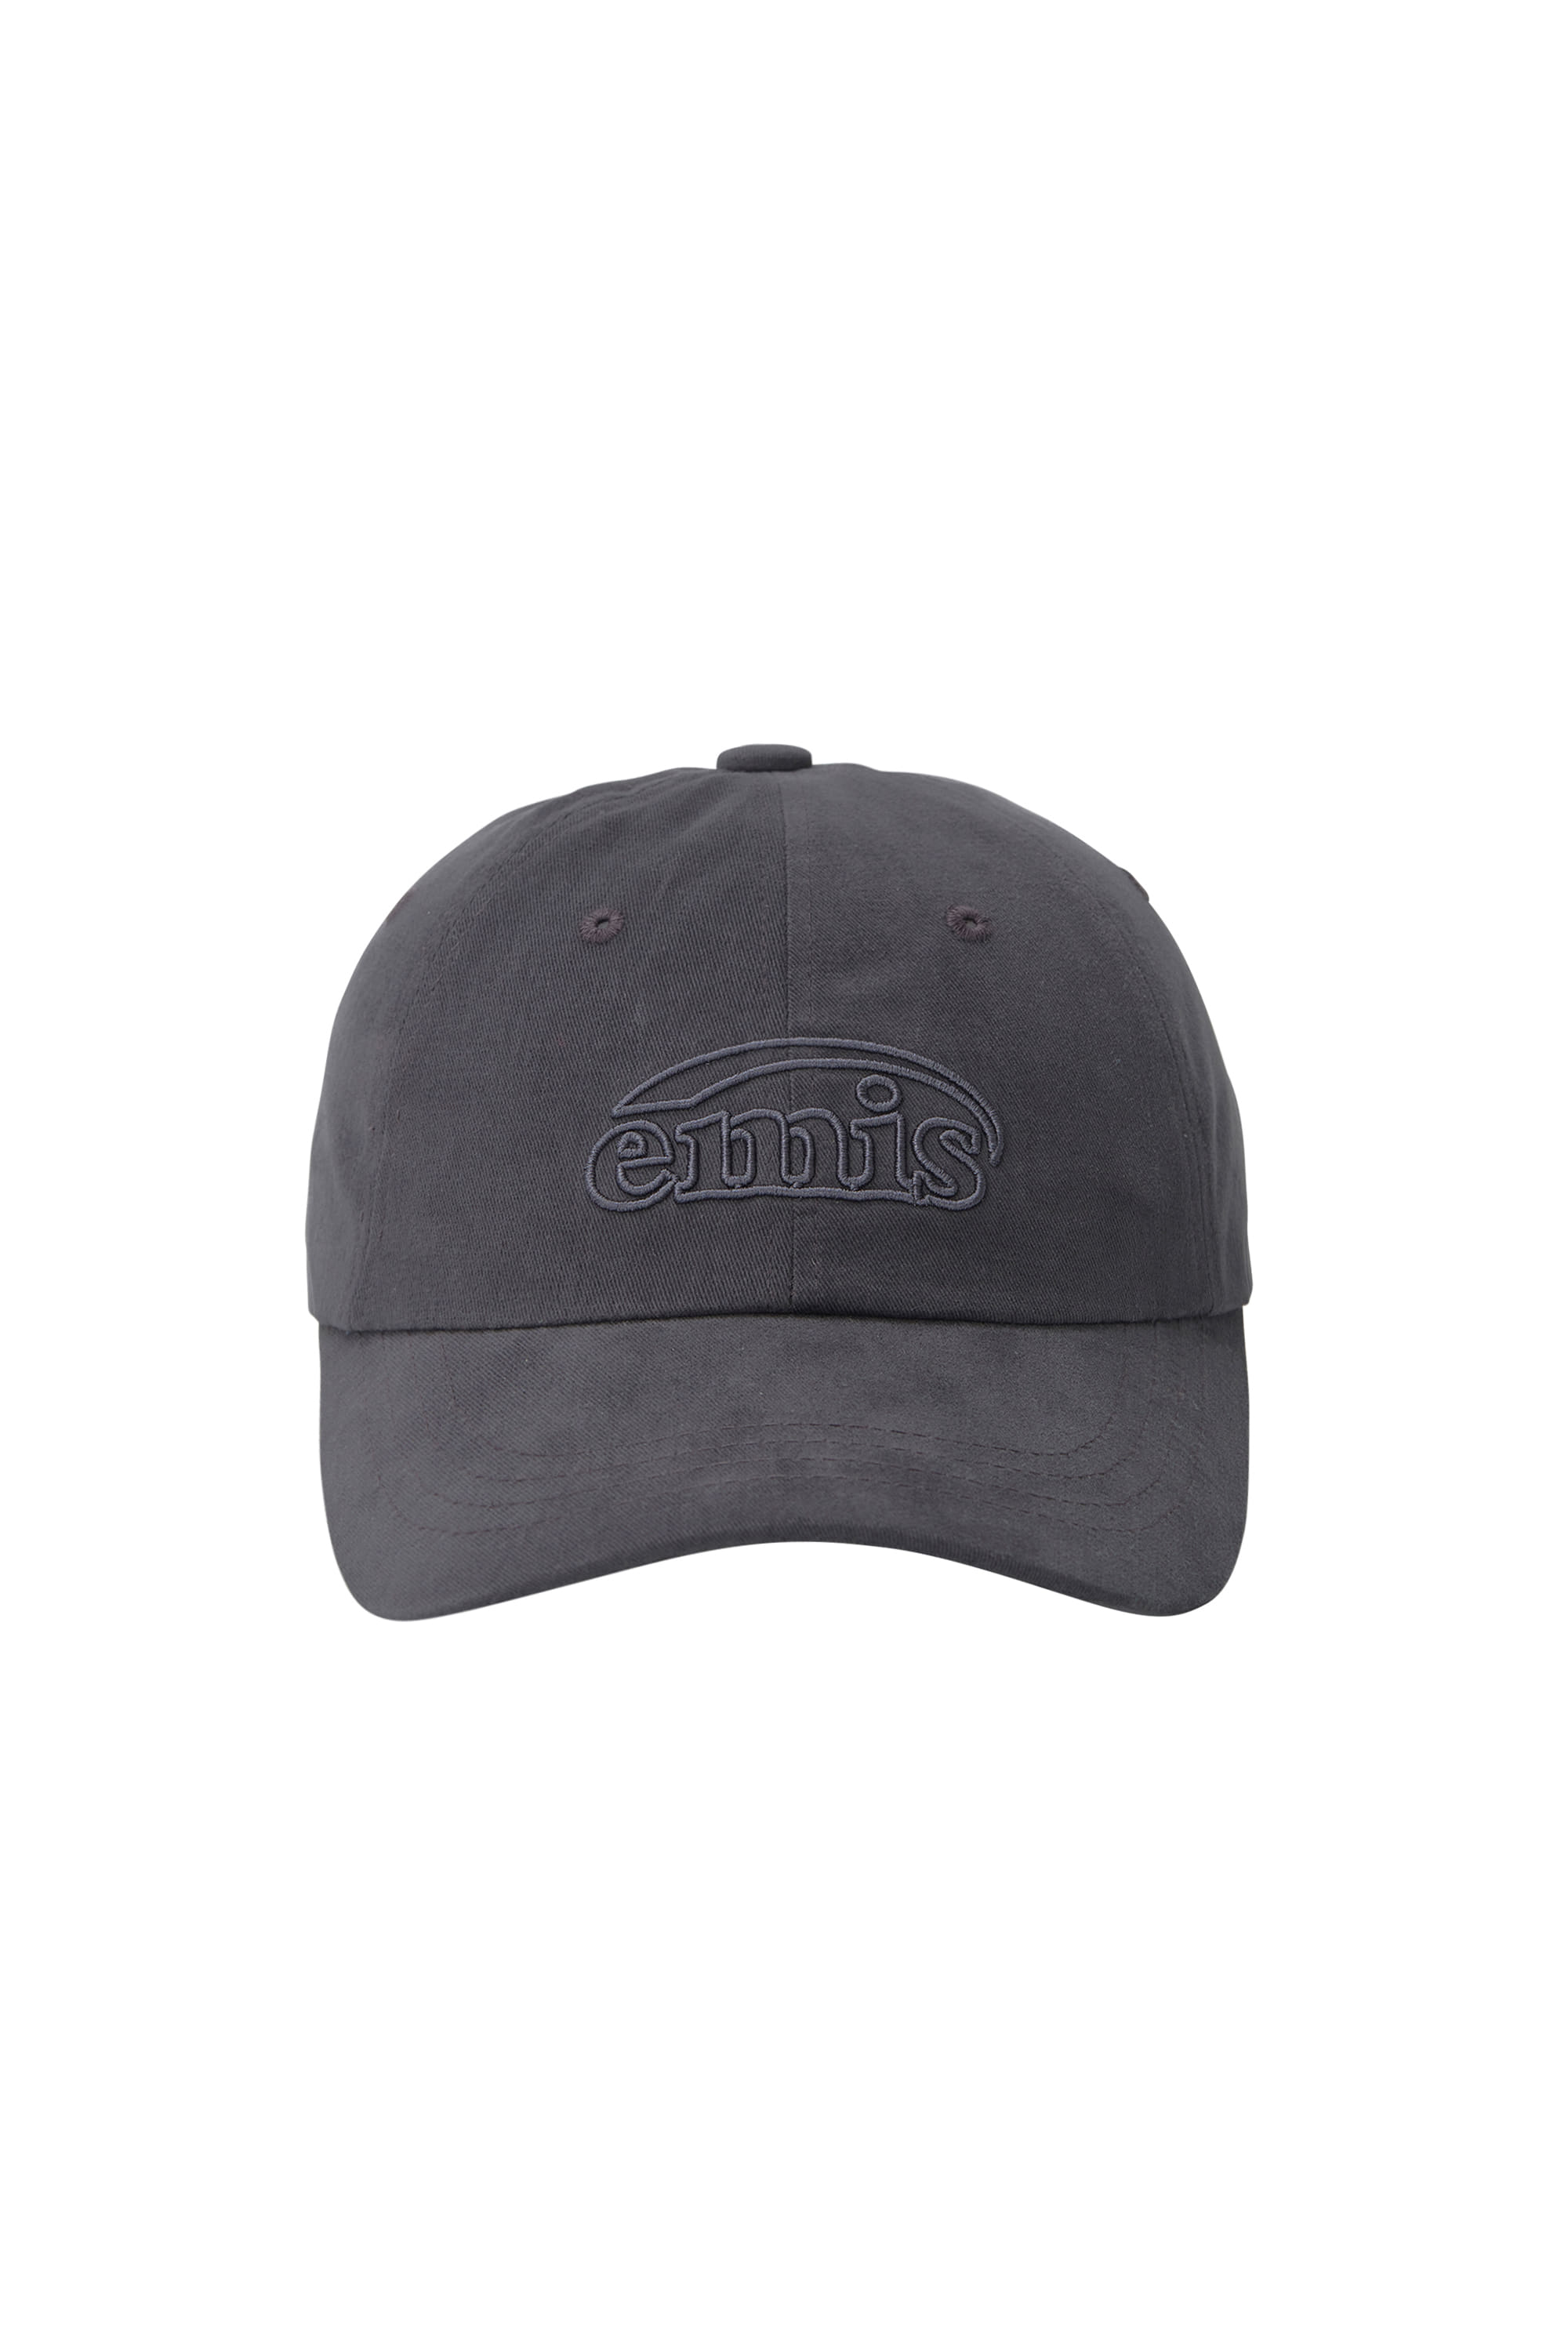 COTTON BRUSHED BALL CAP-CHARCOAL